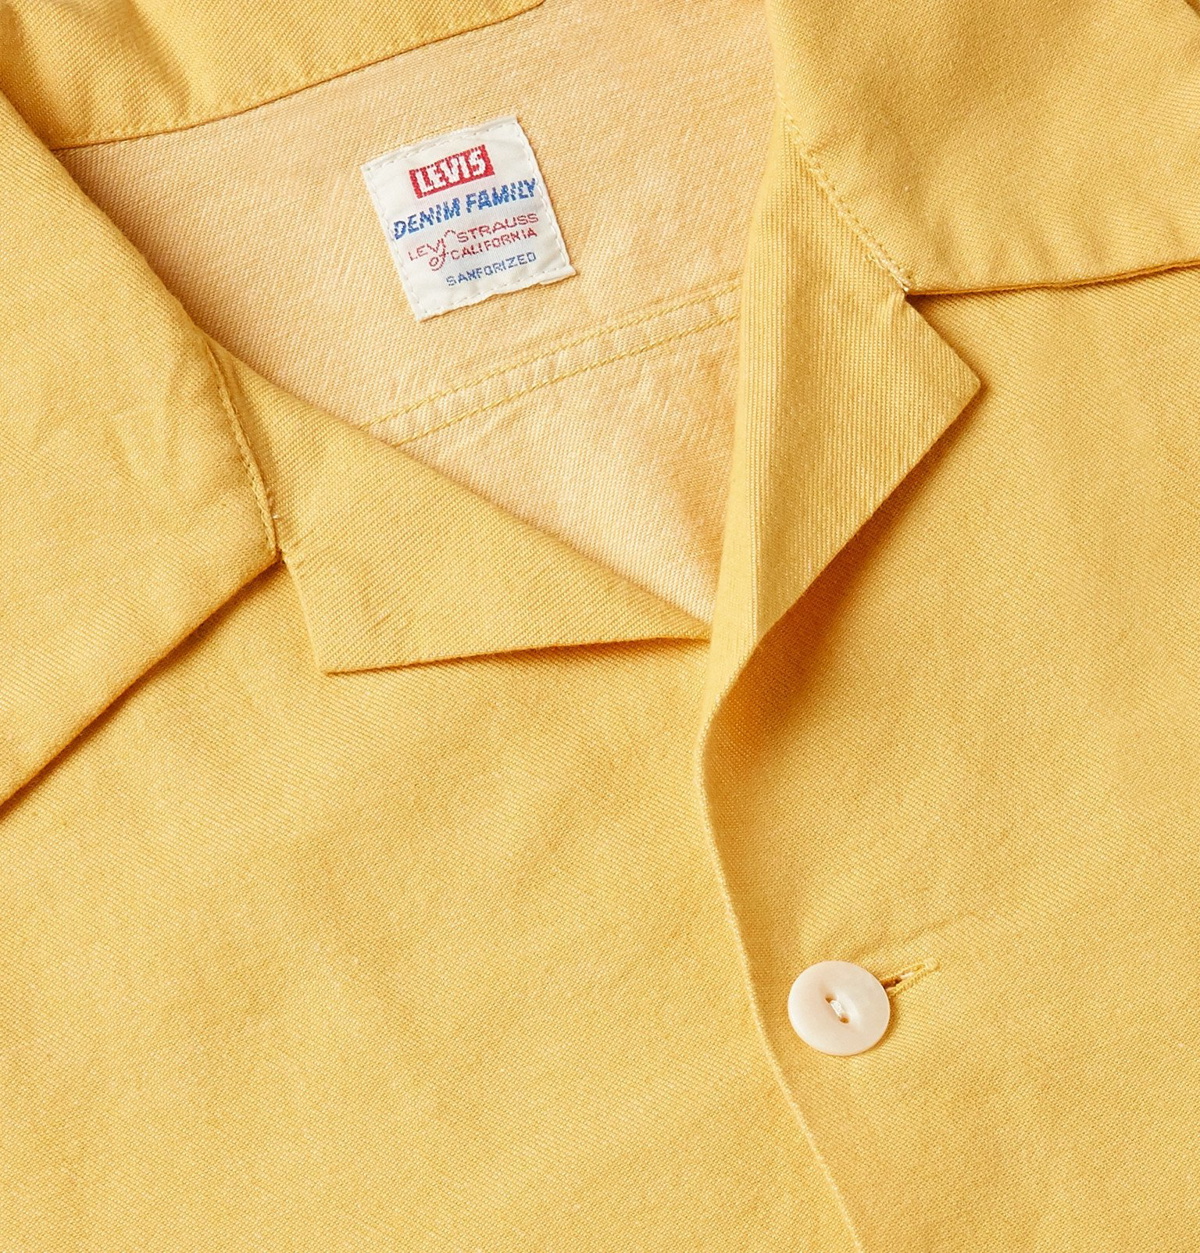 Levi's Vintage Clothing Pocket T-Shirt Yellow Stripe - Made in